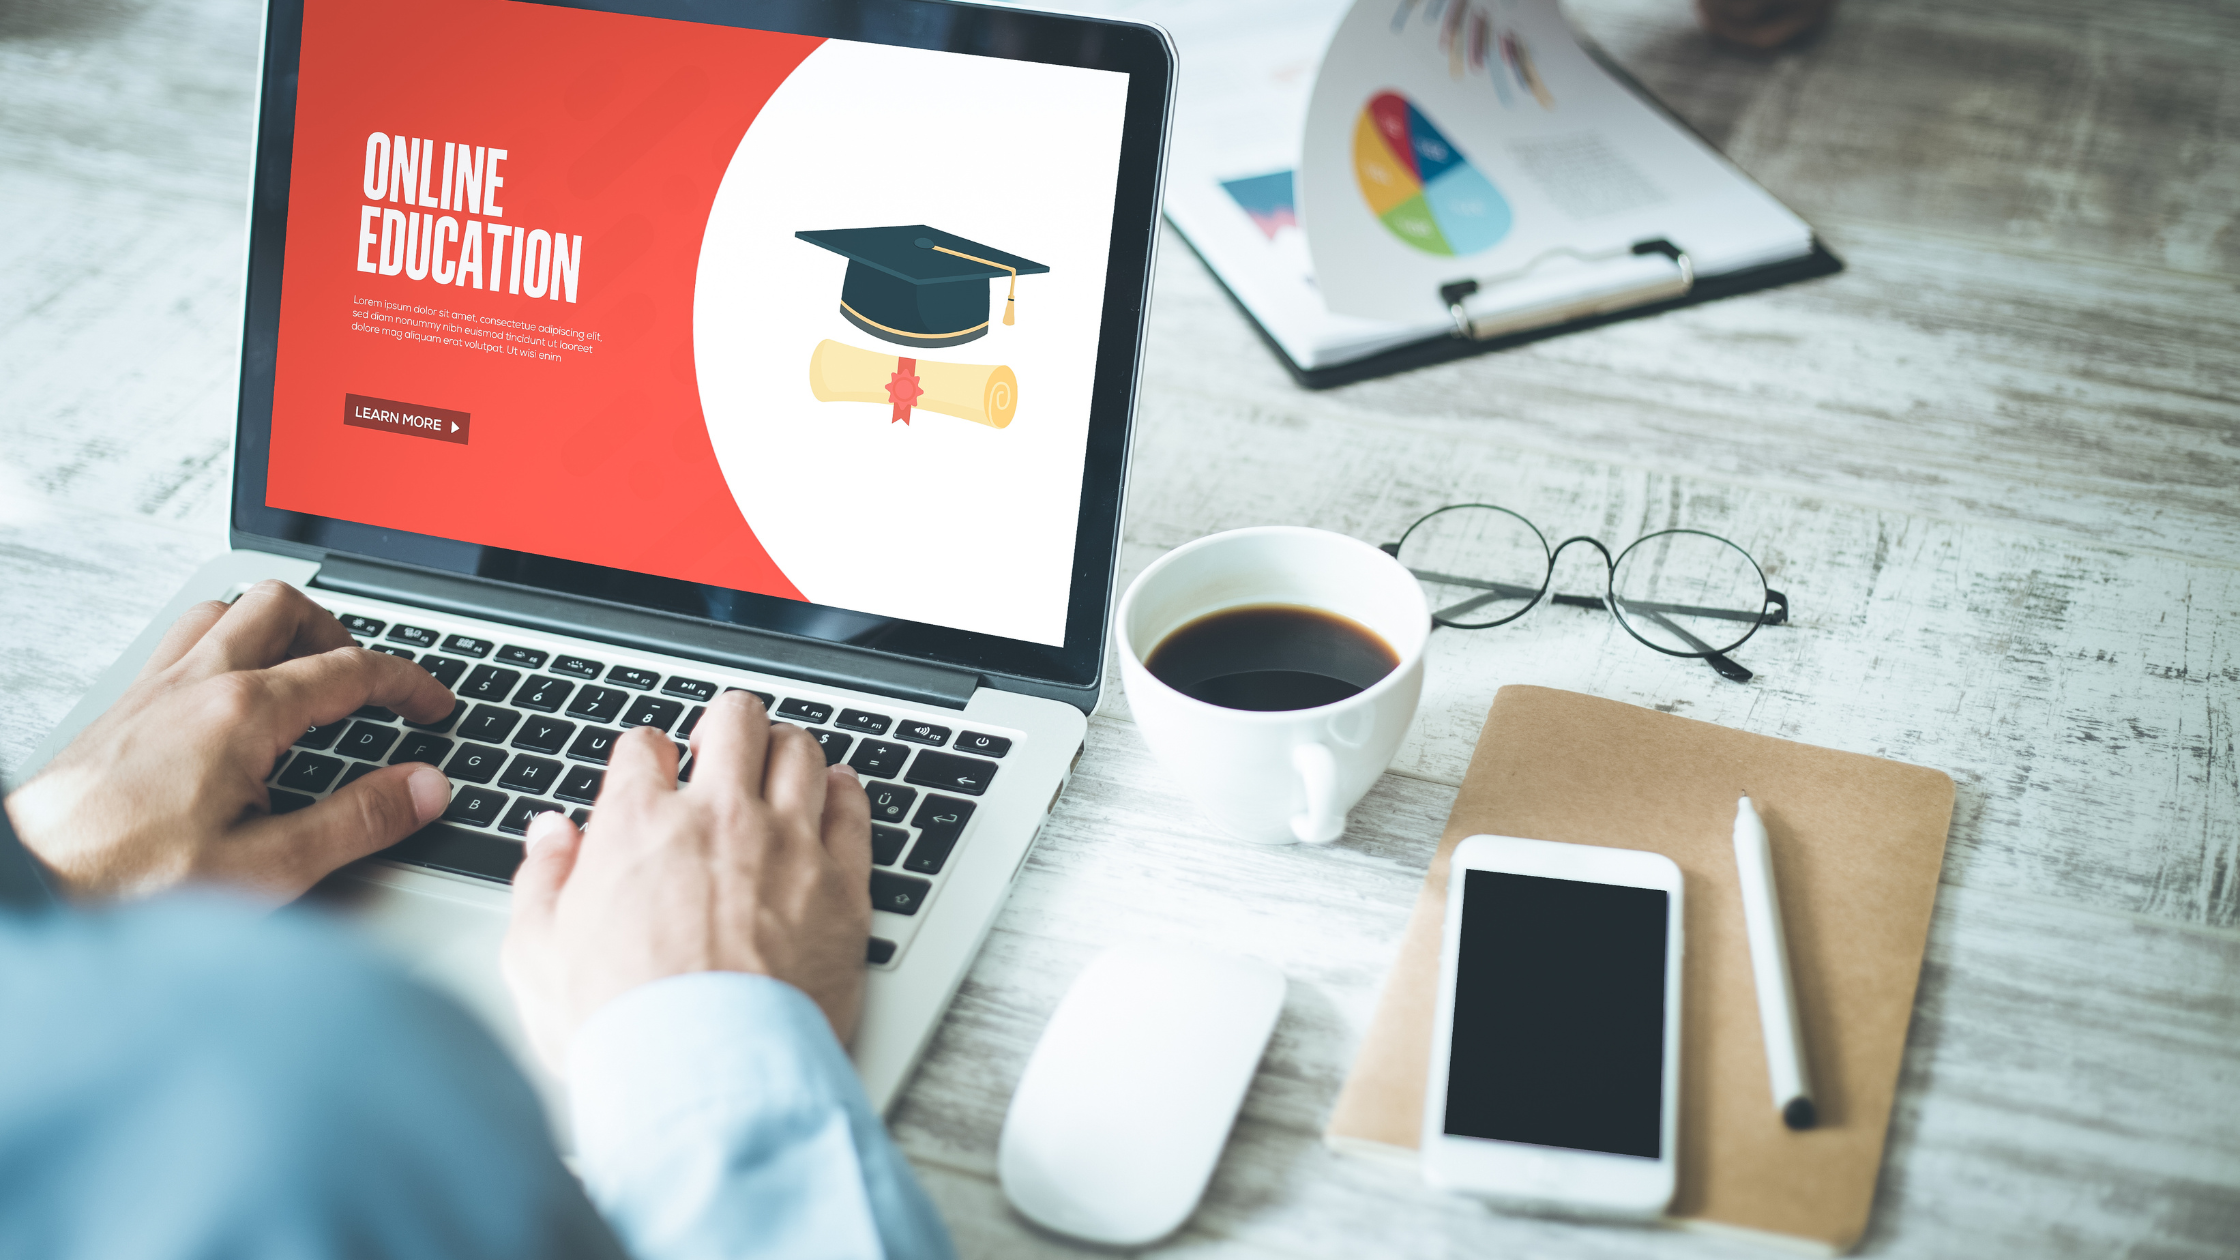 The Right Marketing Strategies for Online Education Programs